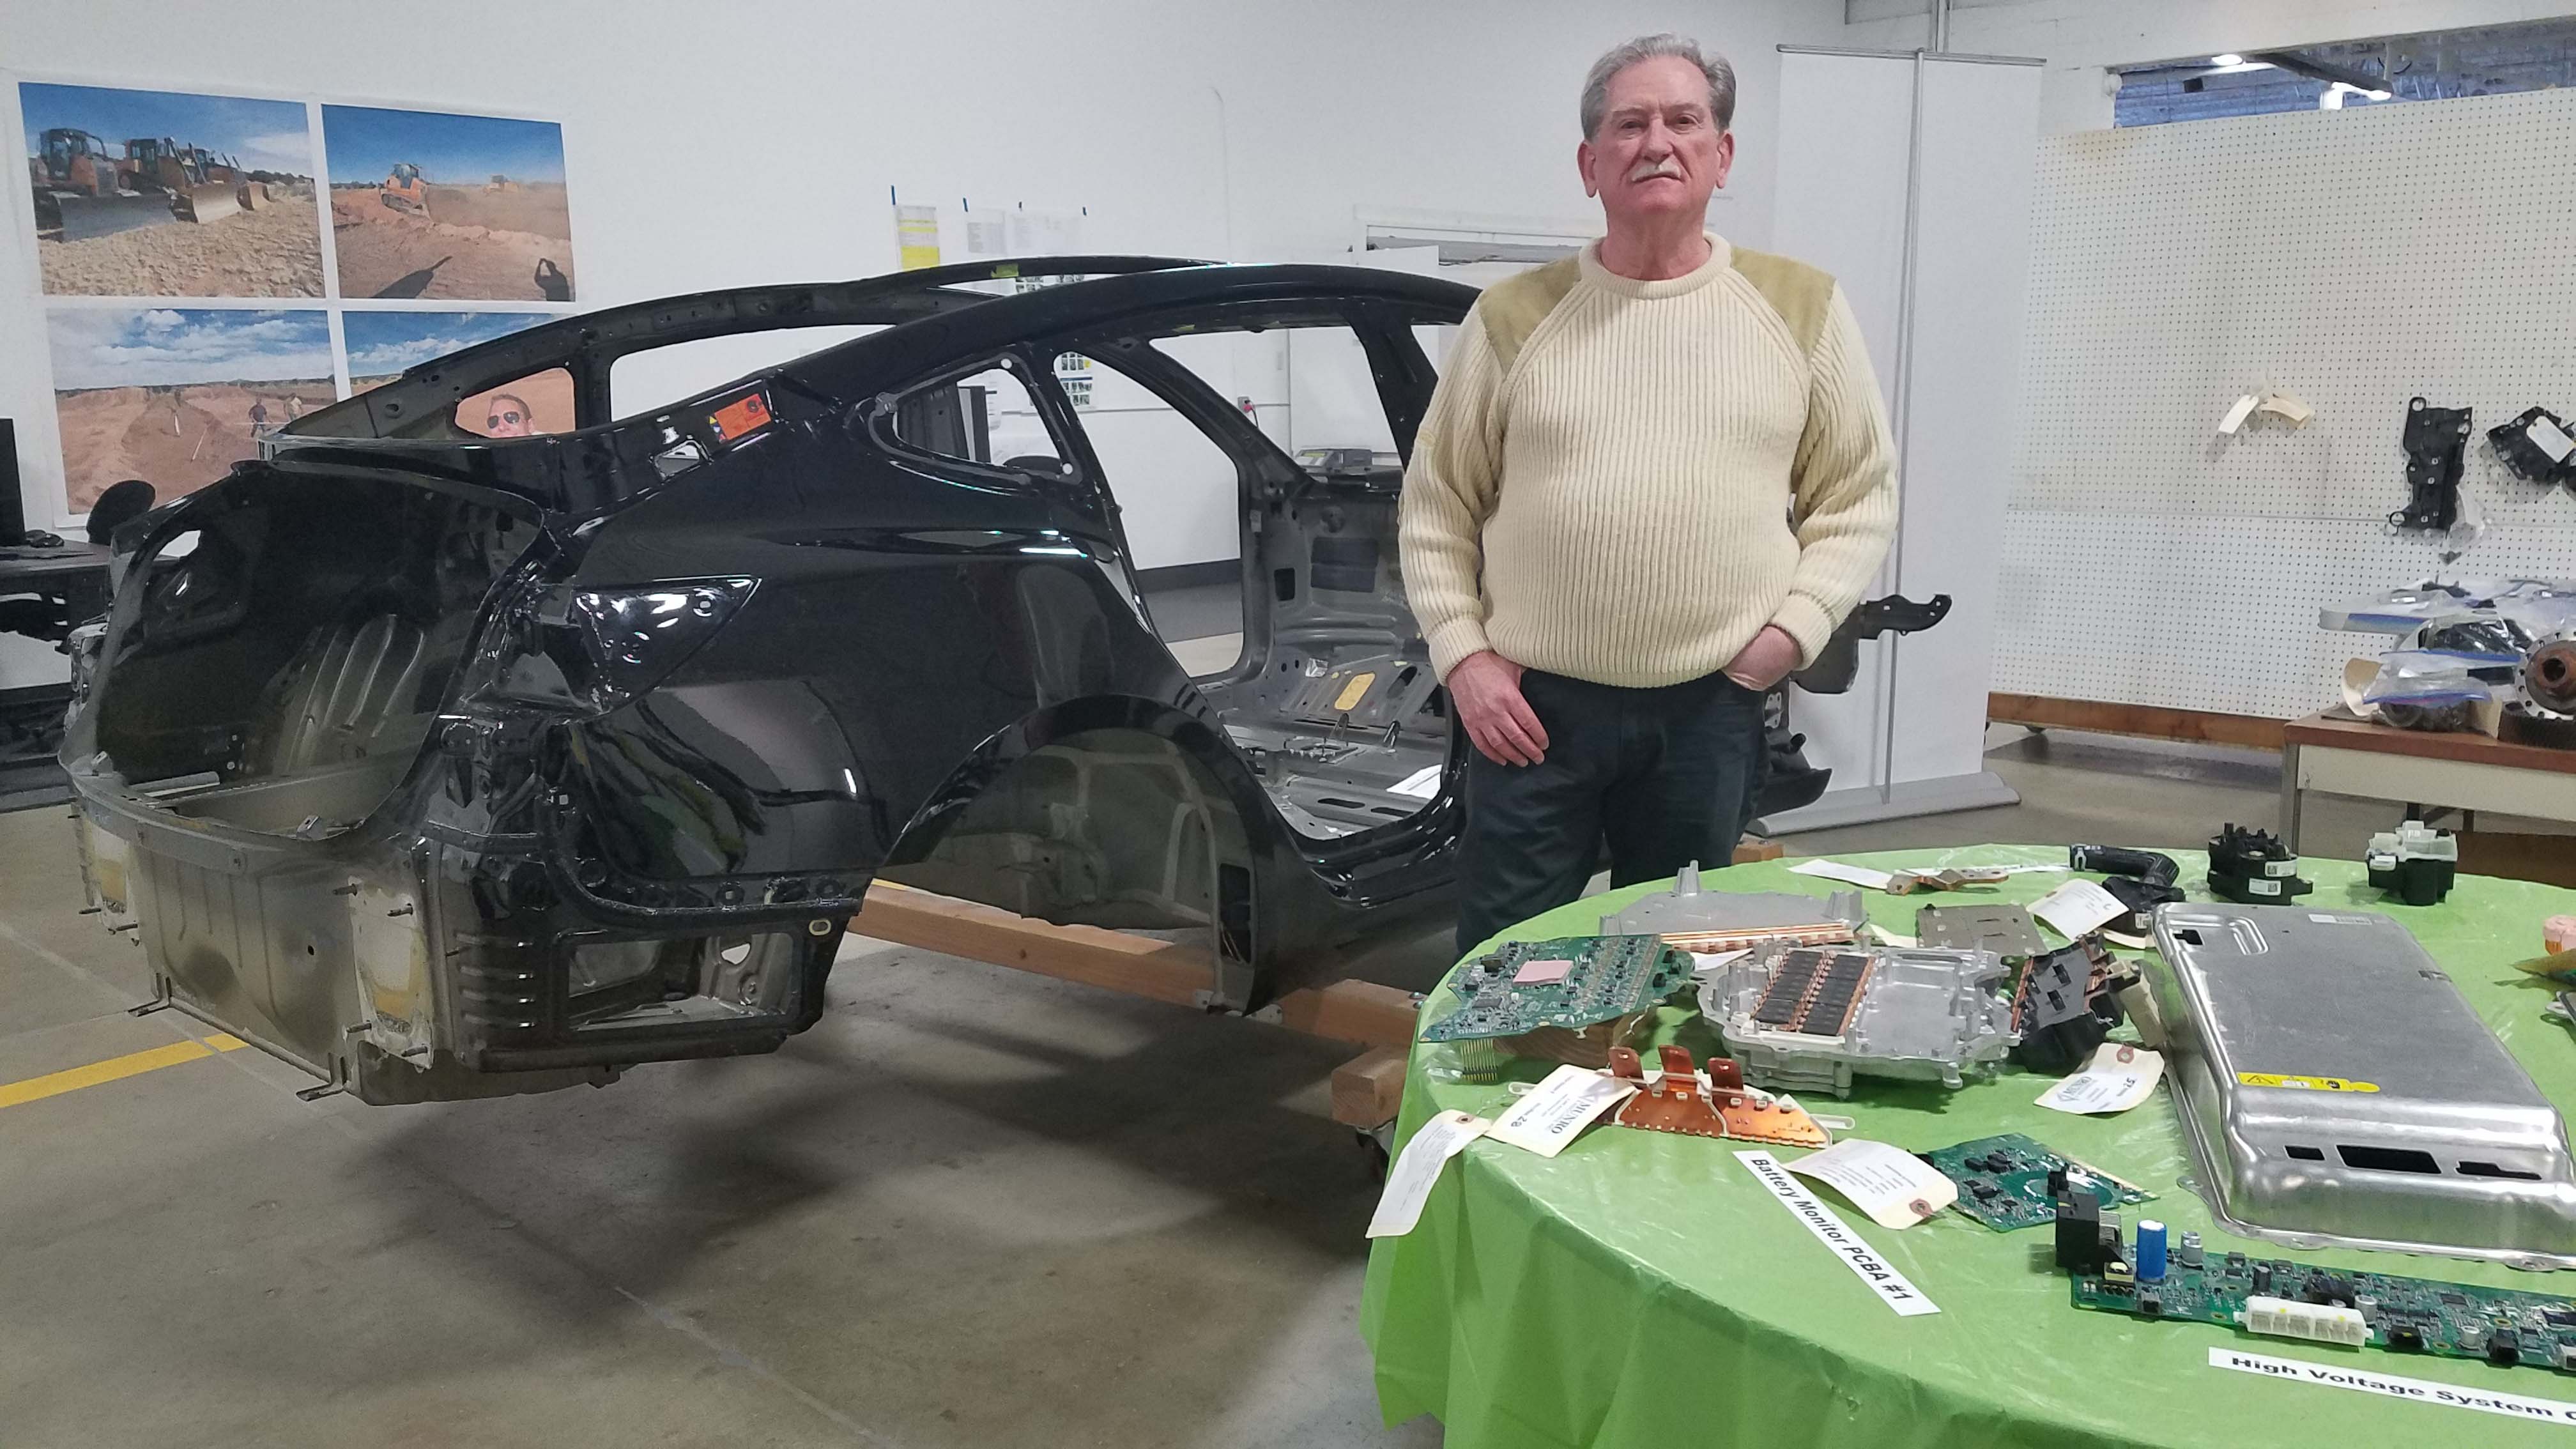 In early 2018, Sandy Munro and his colleagues at Munro & Assoc. tore down a Tesla Model 3 over three months and assessed its components and build quality. Results: 1) build quality the worst they have seen, 2) electronics systems tops in class. Manufacturers like Toyota have since bought his report.